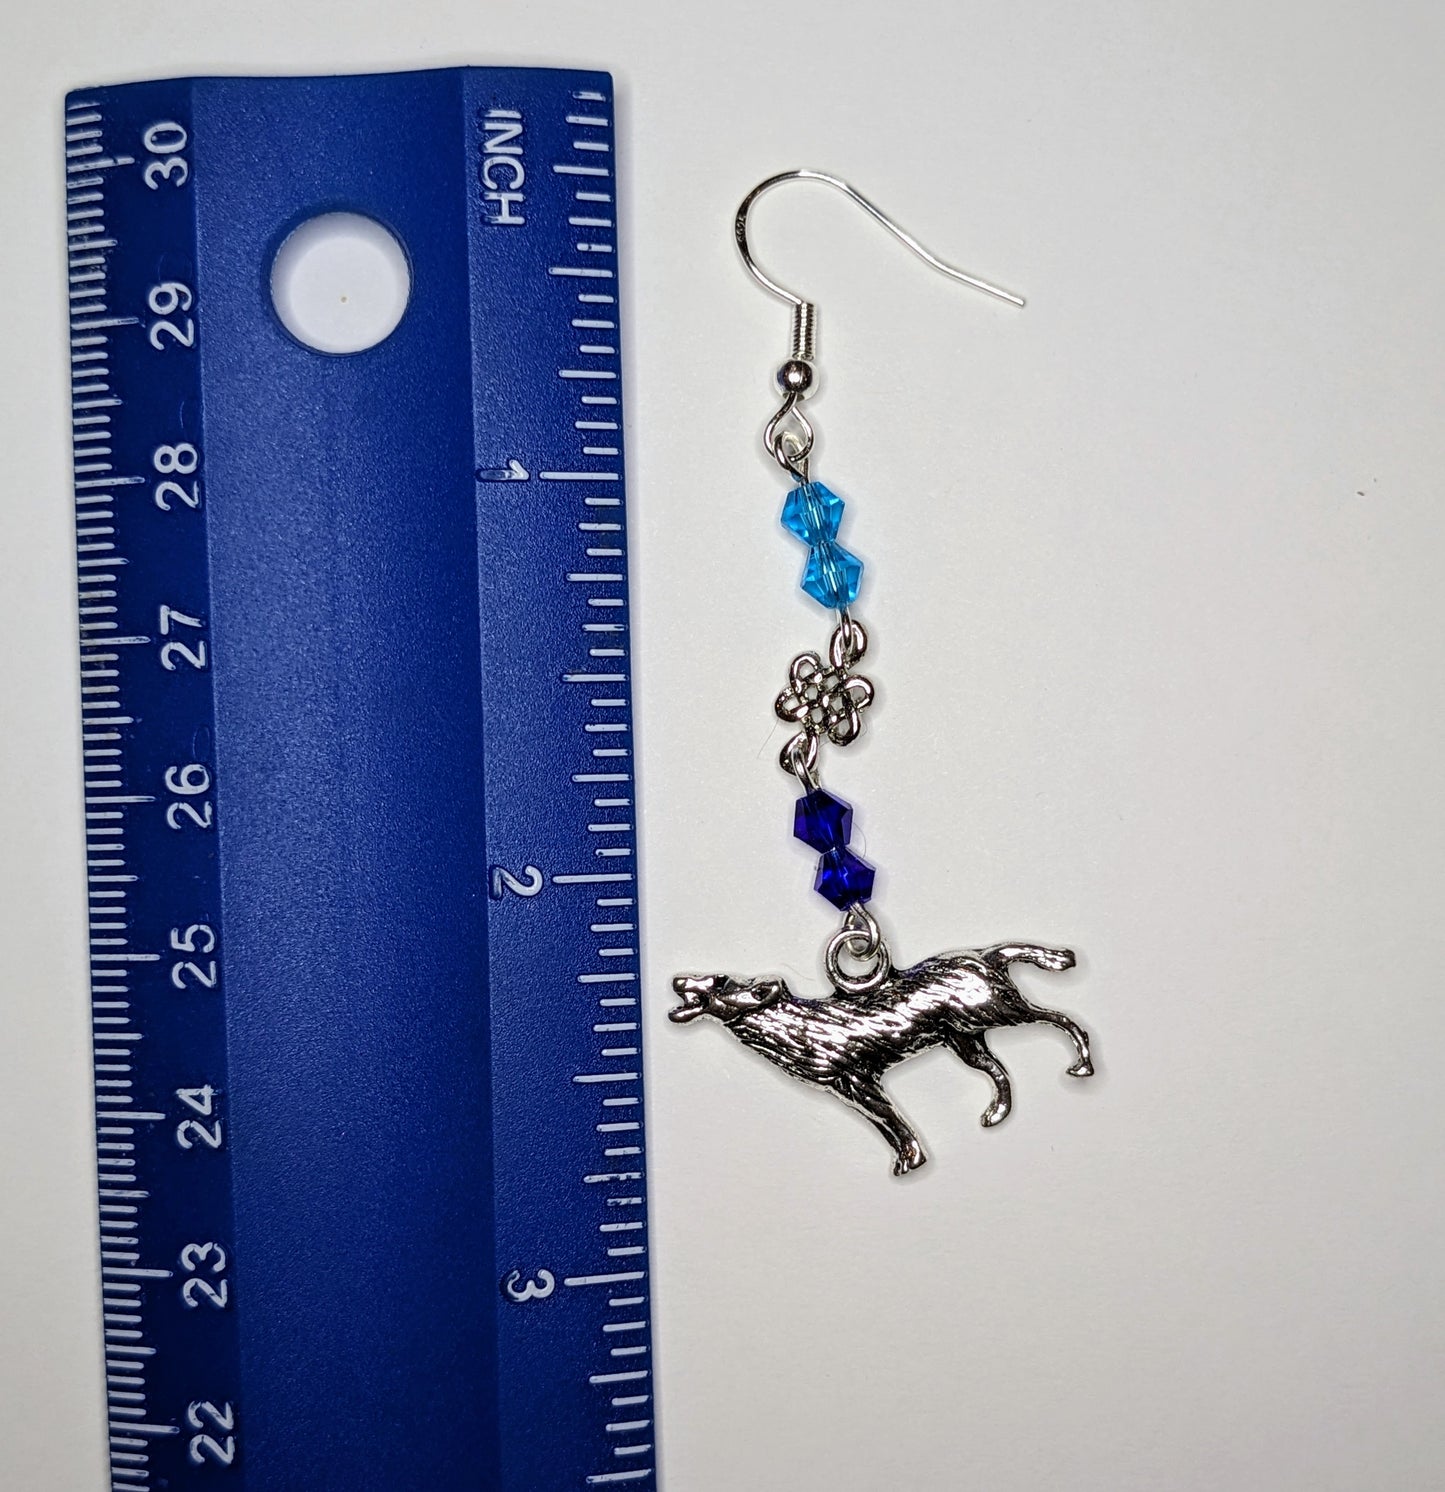 Close up of a single earring with silver howling wolf charm at the bottom and faceted bicone crystal beads in light blue & dark blue separated by a silver Celtic knot connector. Earring is next to a blue ruler and is 3 inches long 